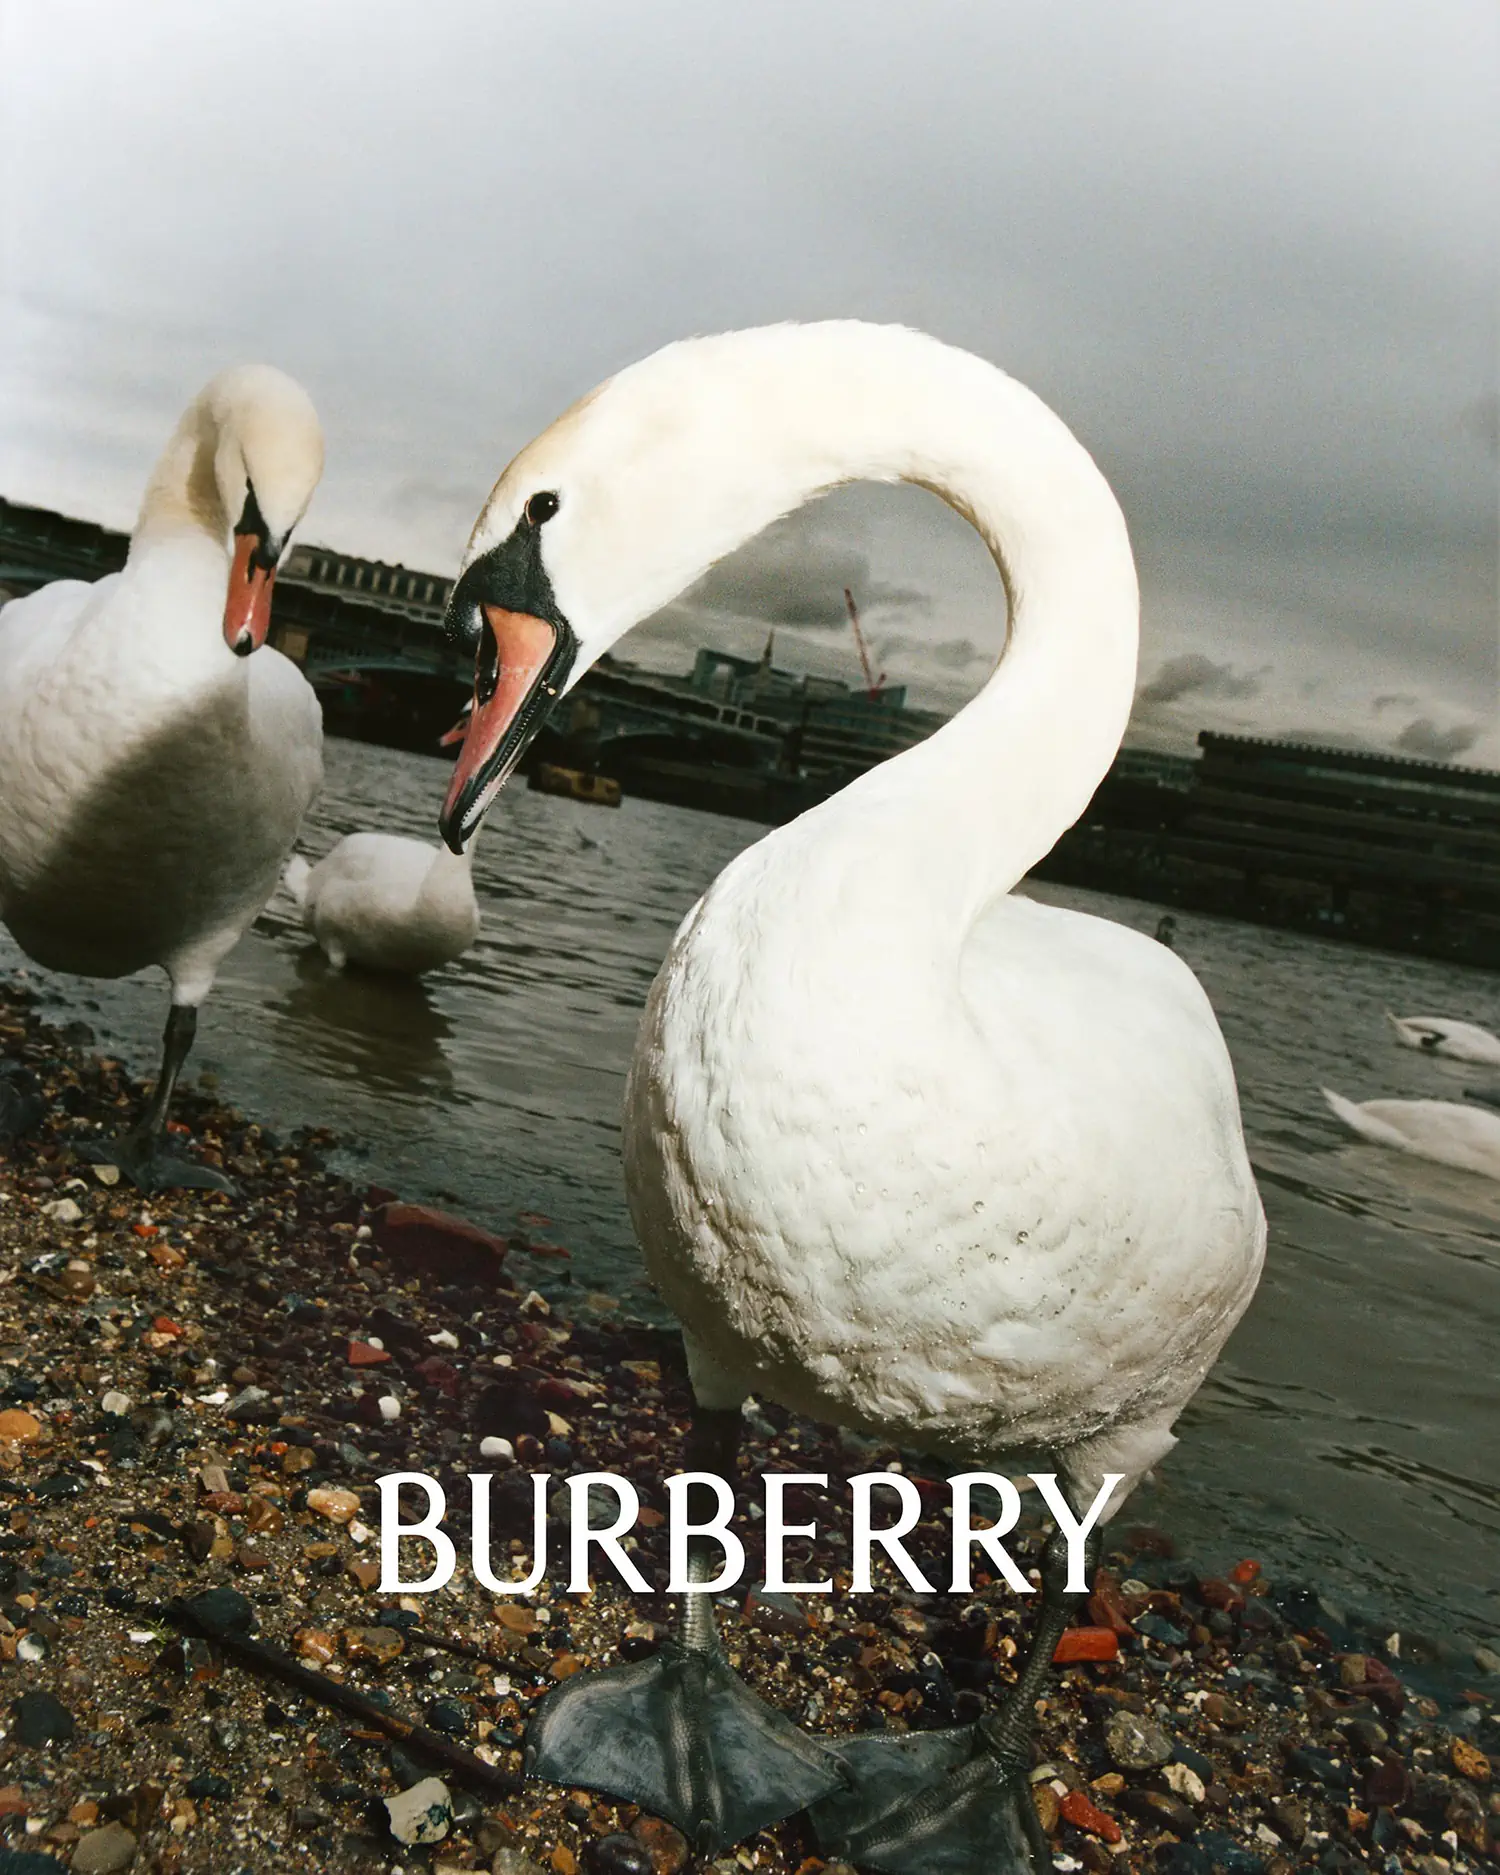 Burberry unveils new identity & new campaign under Daniel Lee